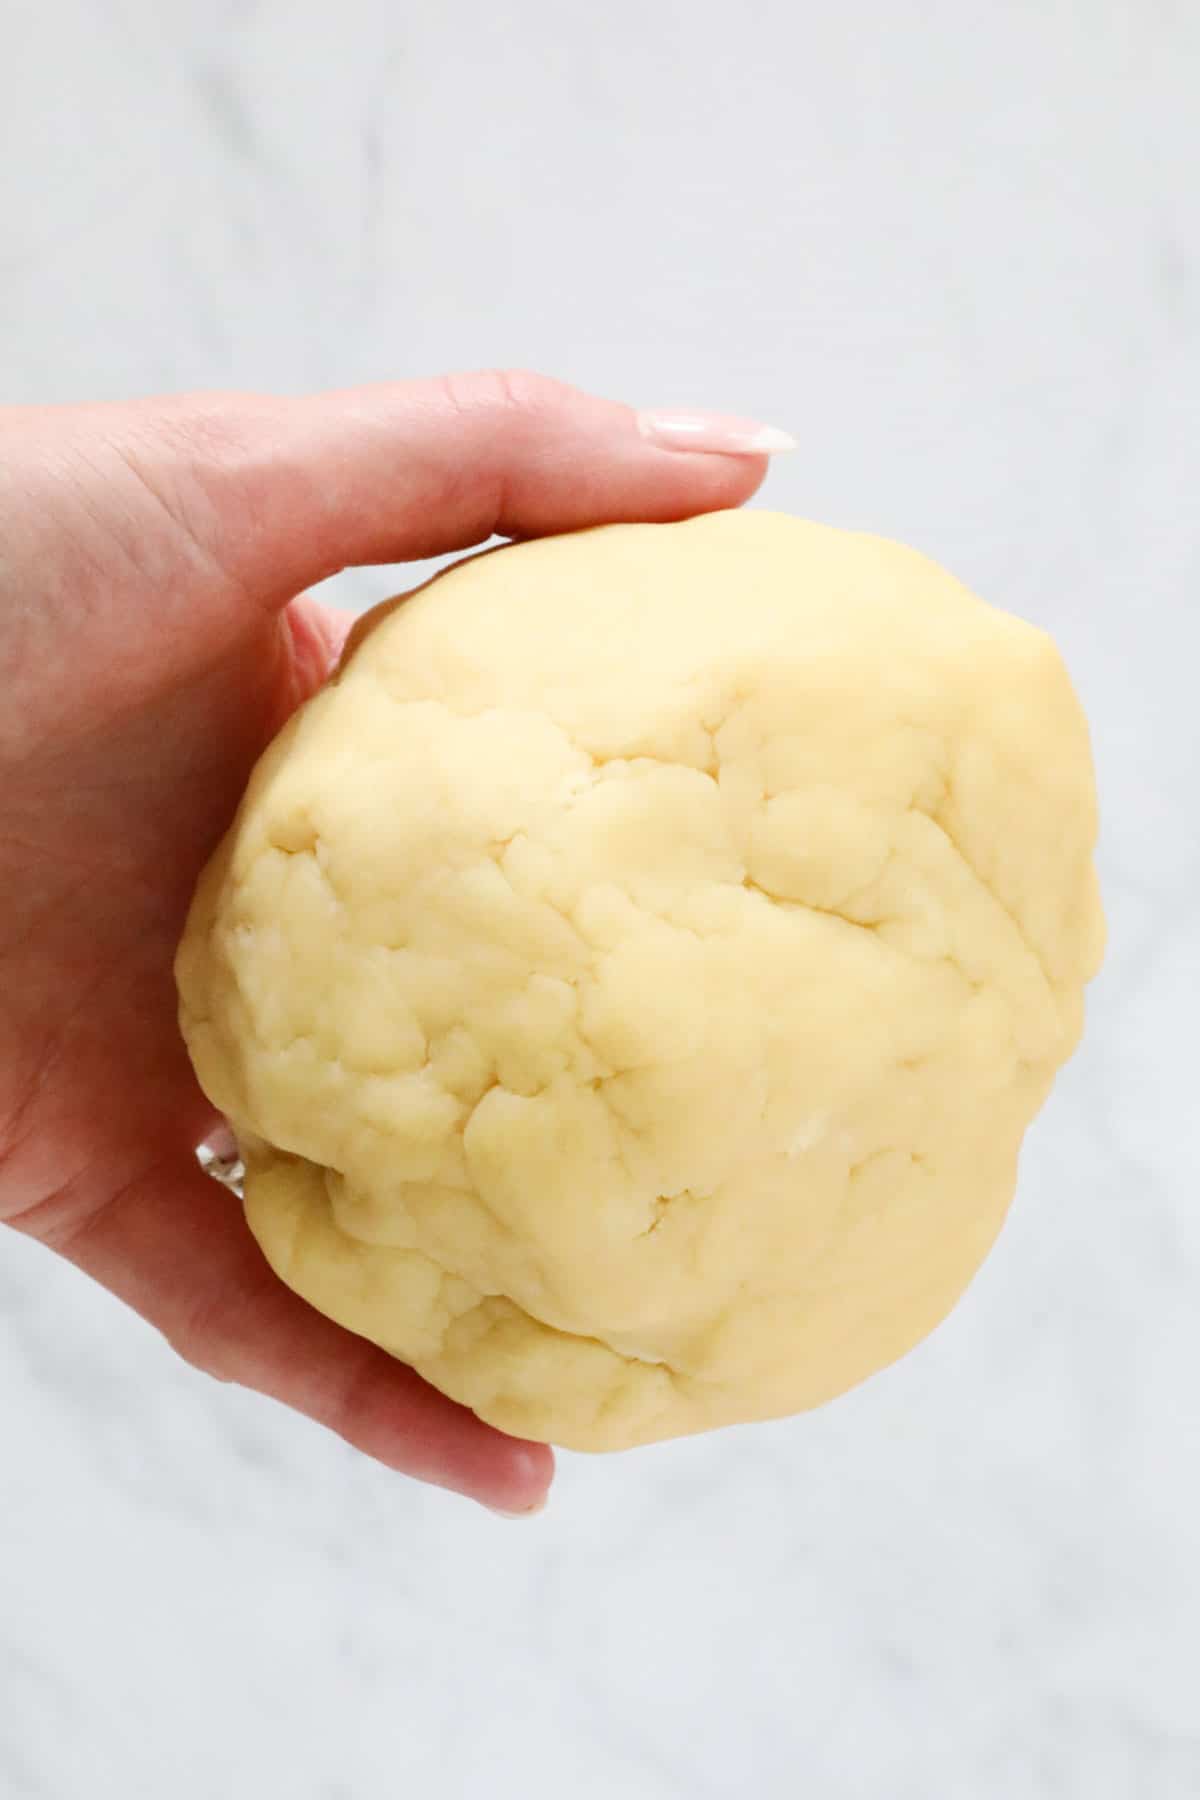 A hand holding a ball of homemade pastry.